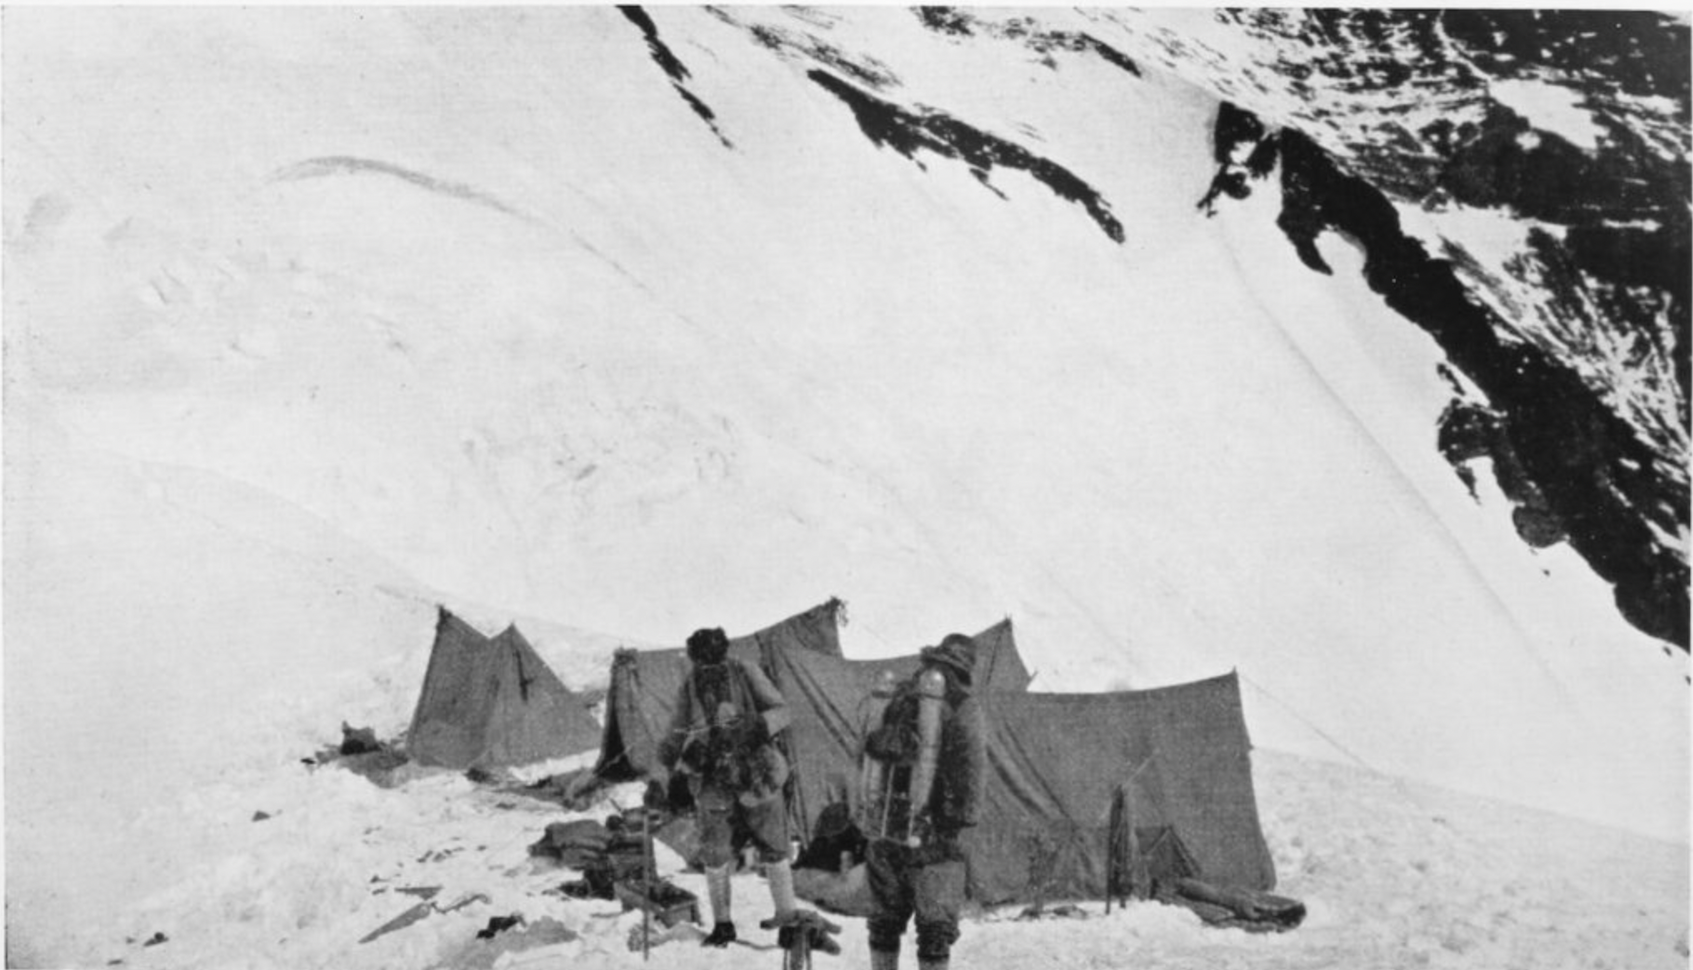 This old photo of mountaineers from 1924. The men in the picture are George Mallory (left), the greatest mountaineer of the early 20th century, and his climbing partner Sandy Irvine (right), at their advance camp on Everest. Two days later they would attempt the summit and disappear without a trace. 